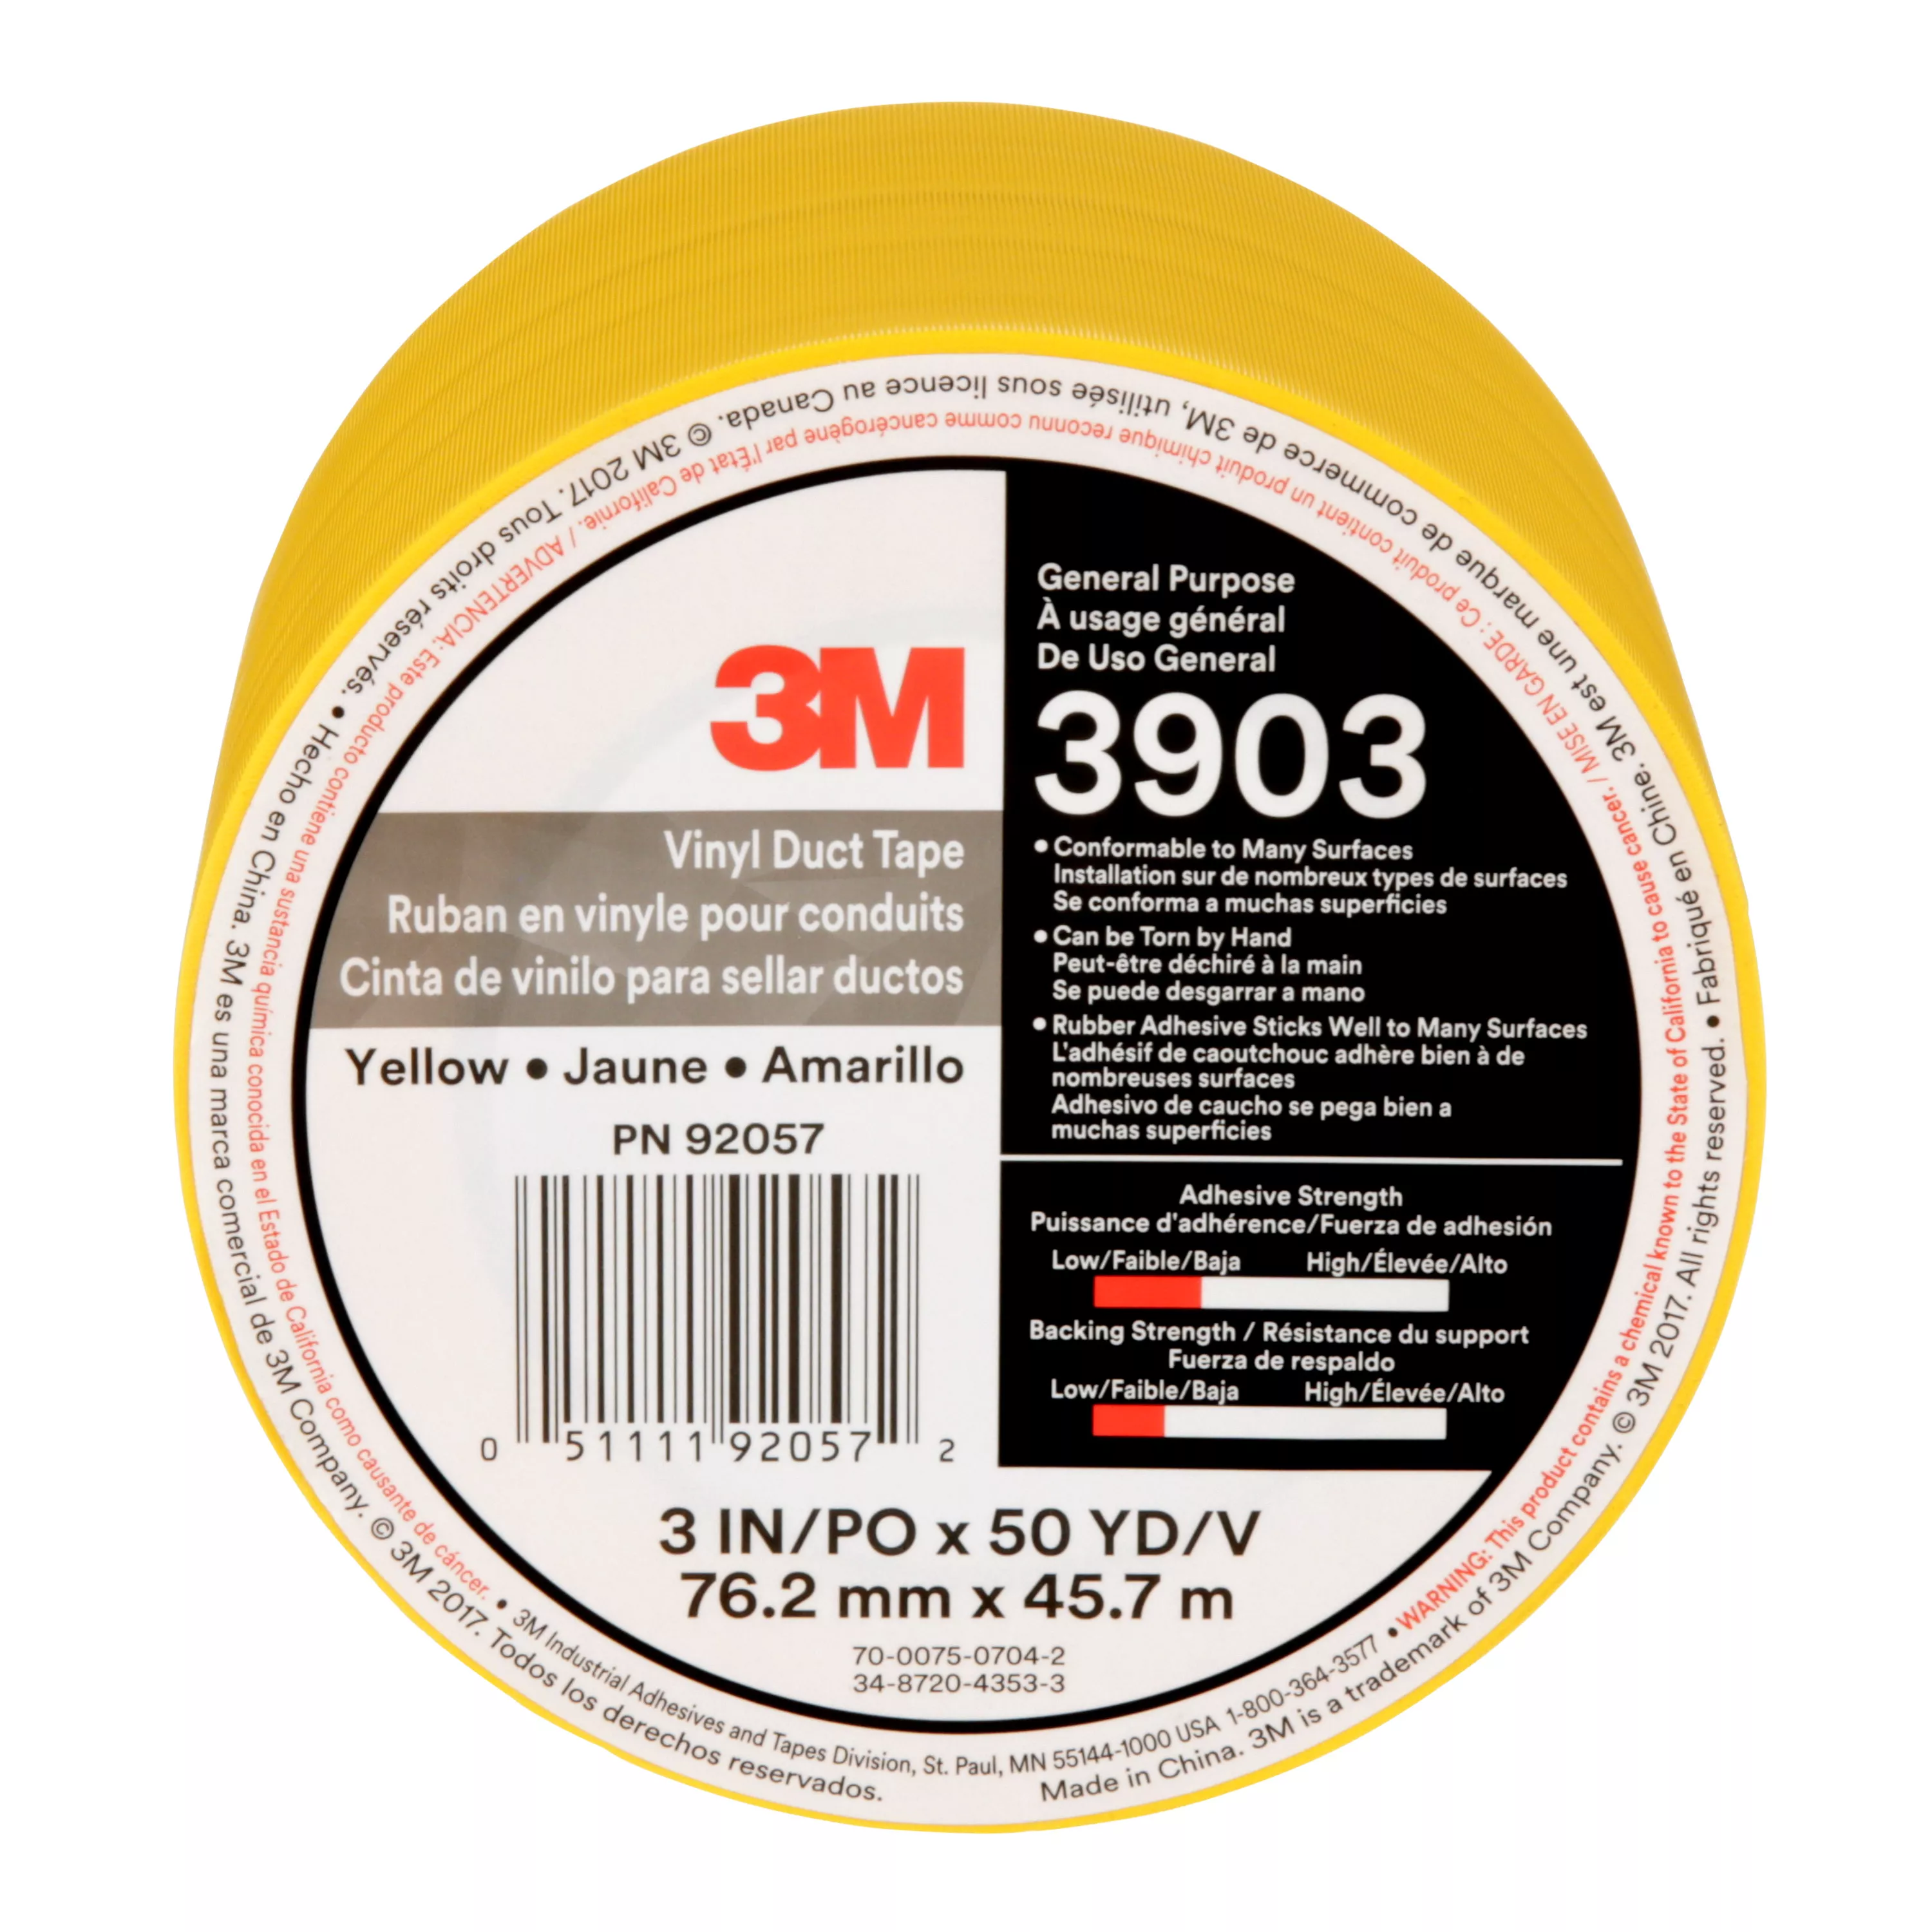 3M™ Vinyl Duct Tape 3903, Yellow, 3 in x 50 yd, 6.5 mil, 18/Case,
Individually Wrapped Conveniently Packaged